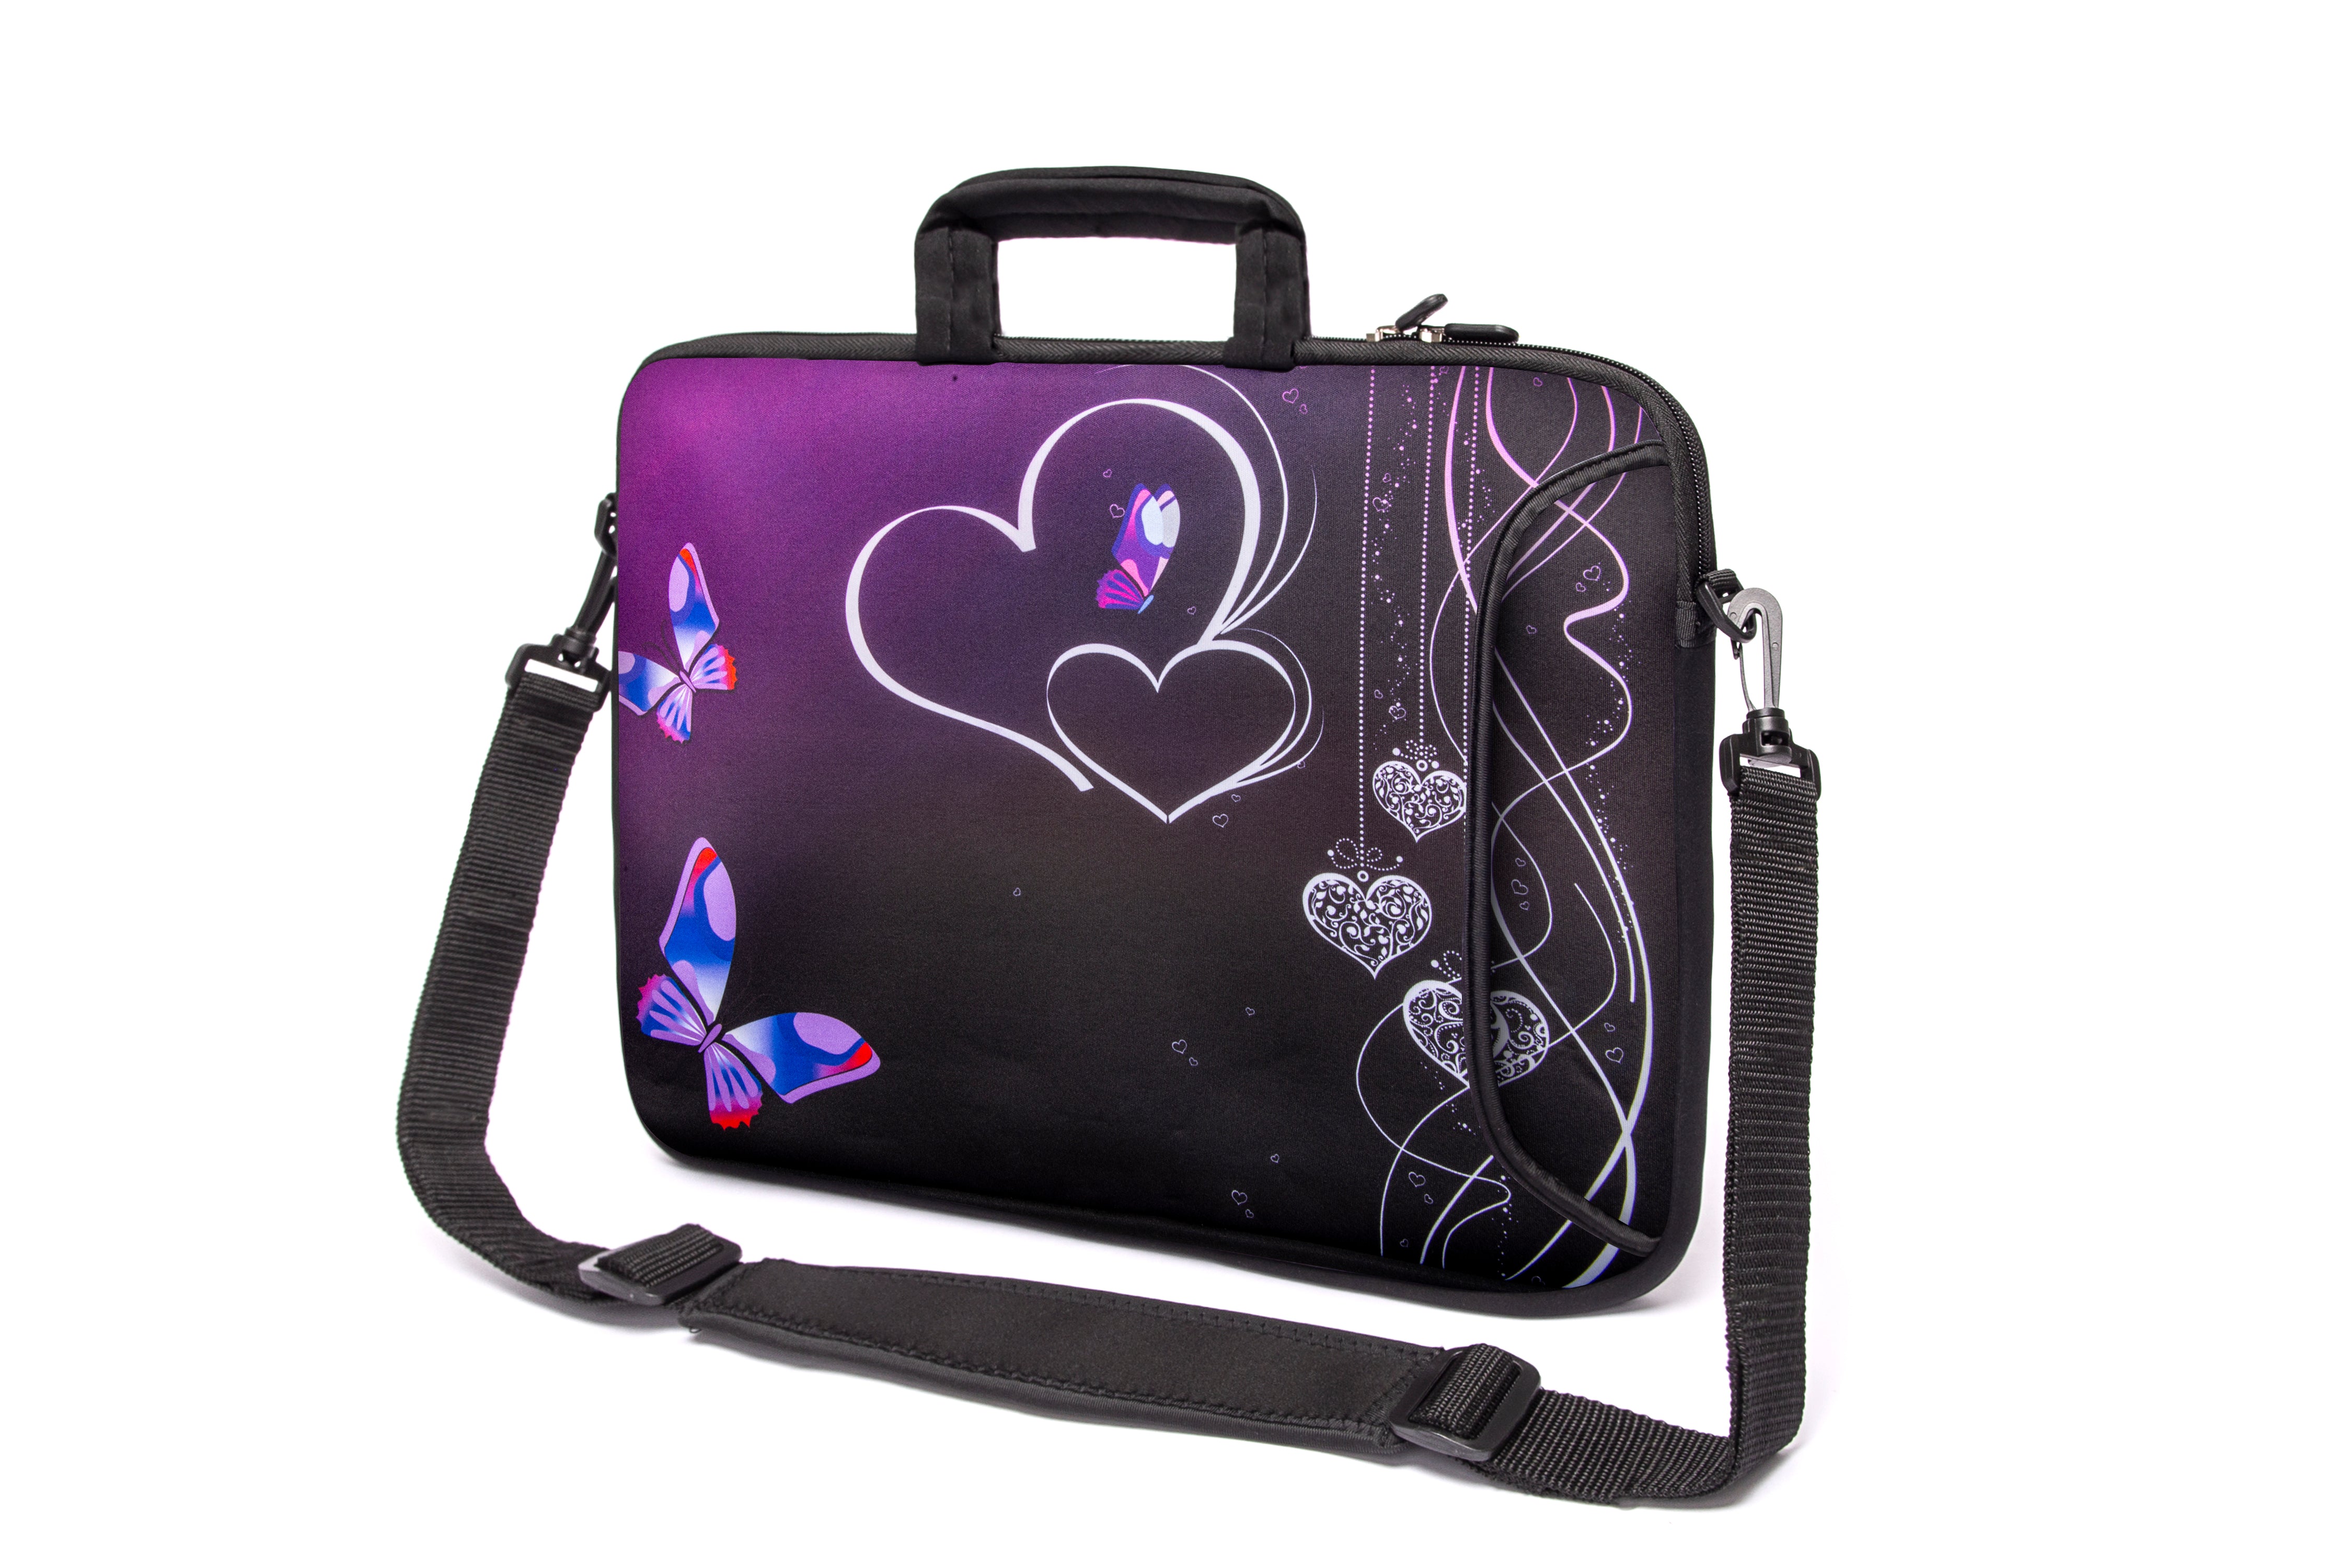 15"- 15.6" (inch) LAPTOP BAG CARRY CASE/BAG WITH HANDLE & STRAP NEOPRENE FOR LAPTOPS/NOTEBOOKS, *Purple Butterflies 2*